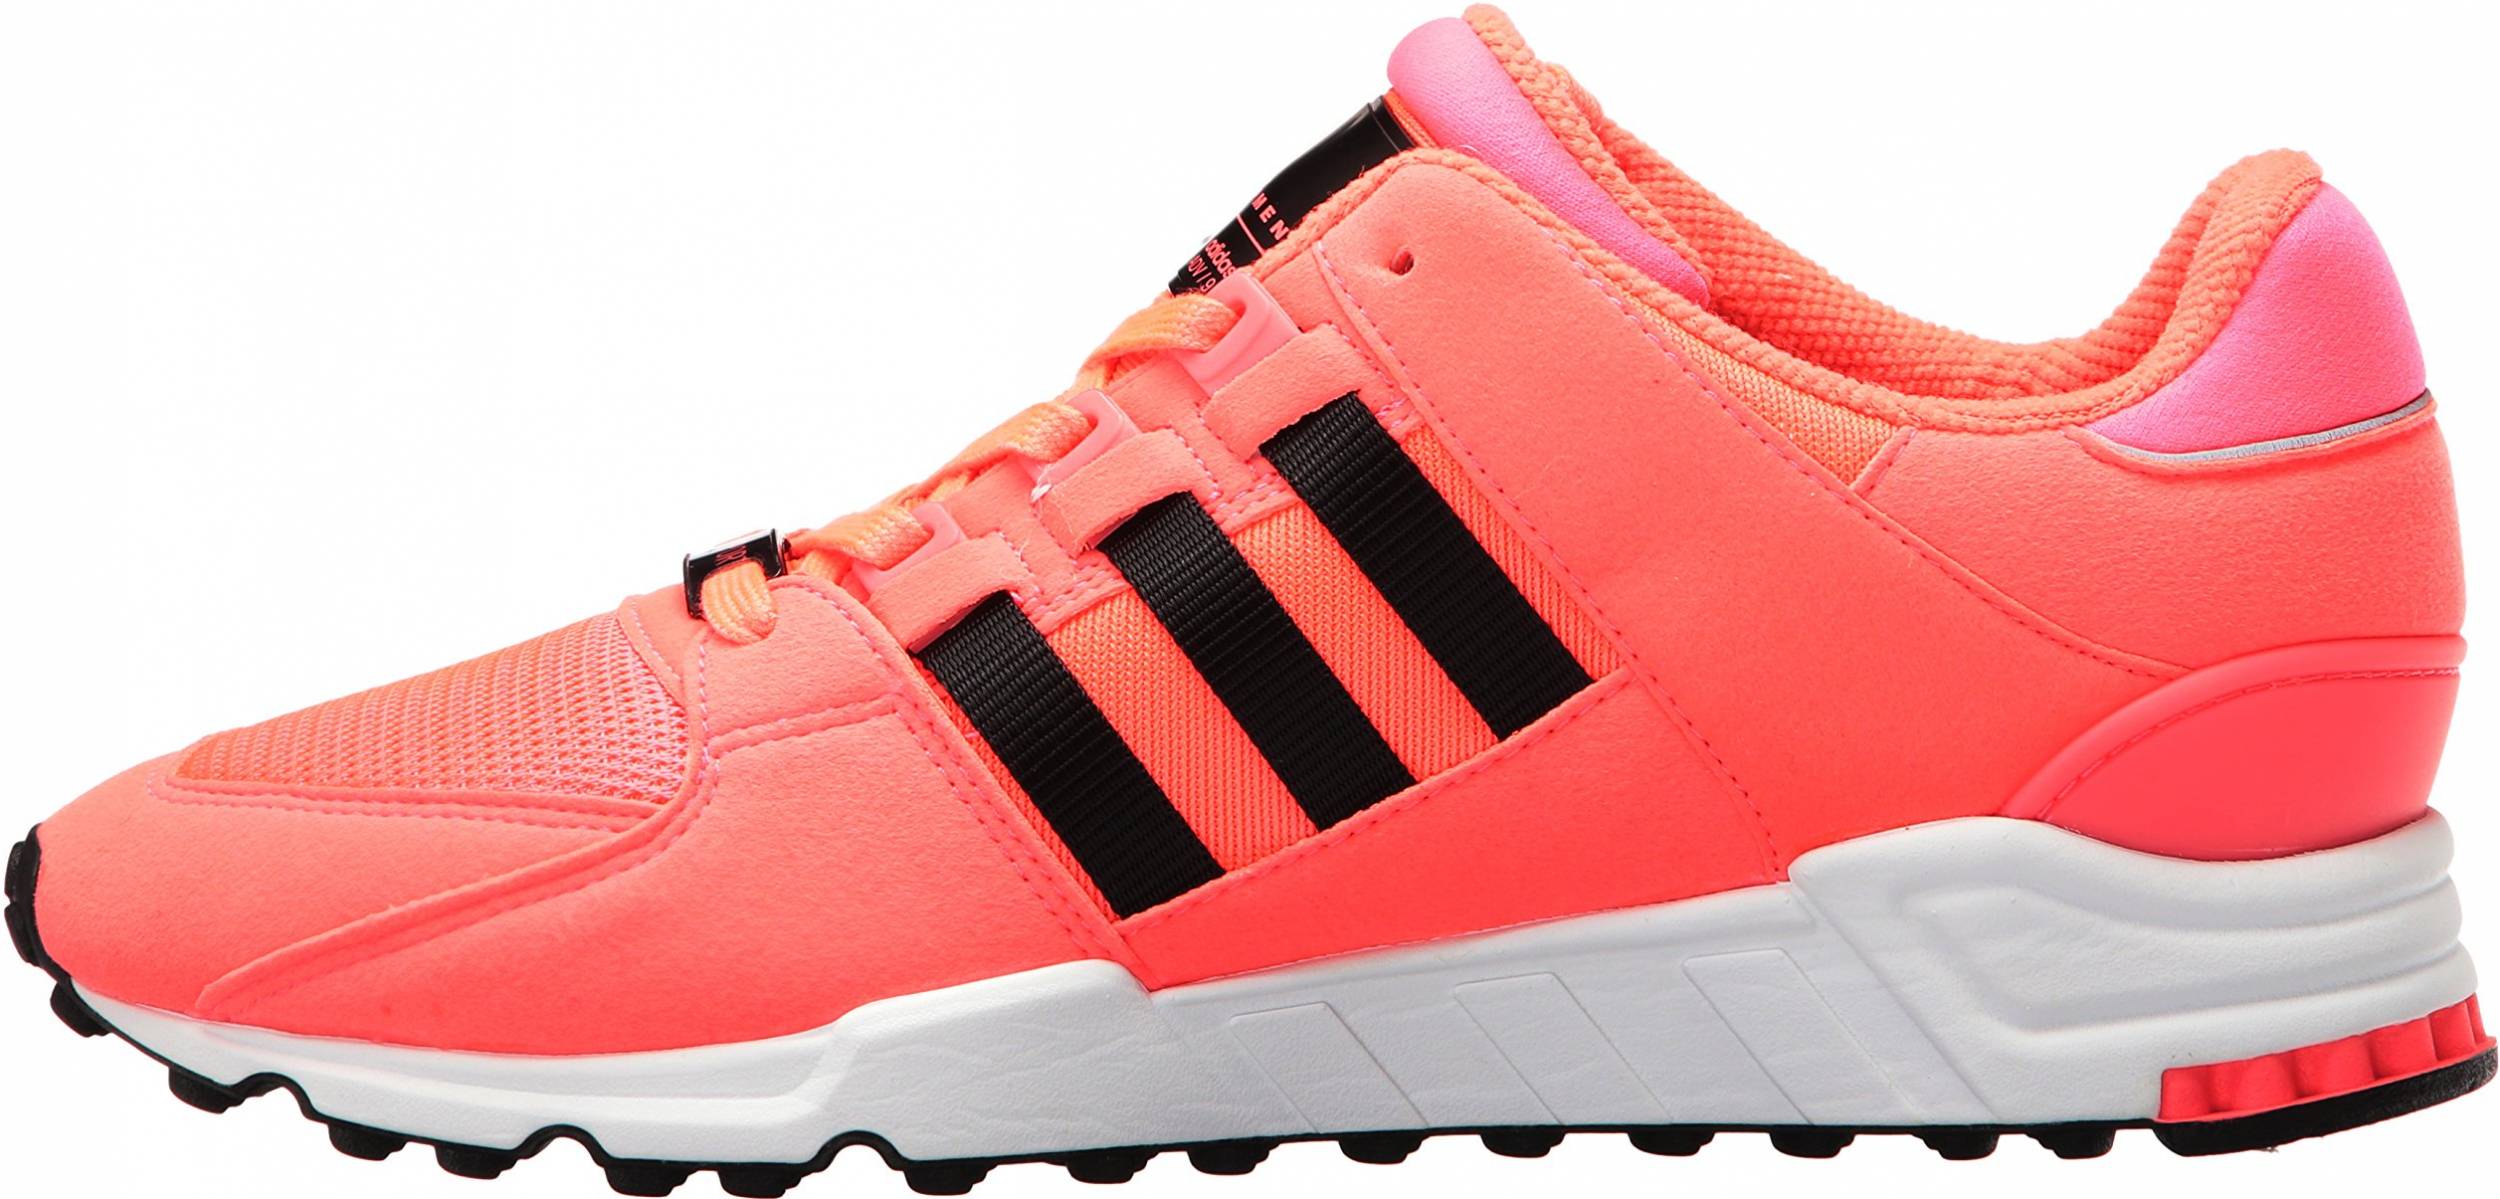 Adidas EQT Support RF sneakers in 3 colors (only £35) | RunRepeat